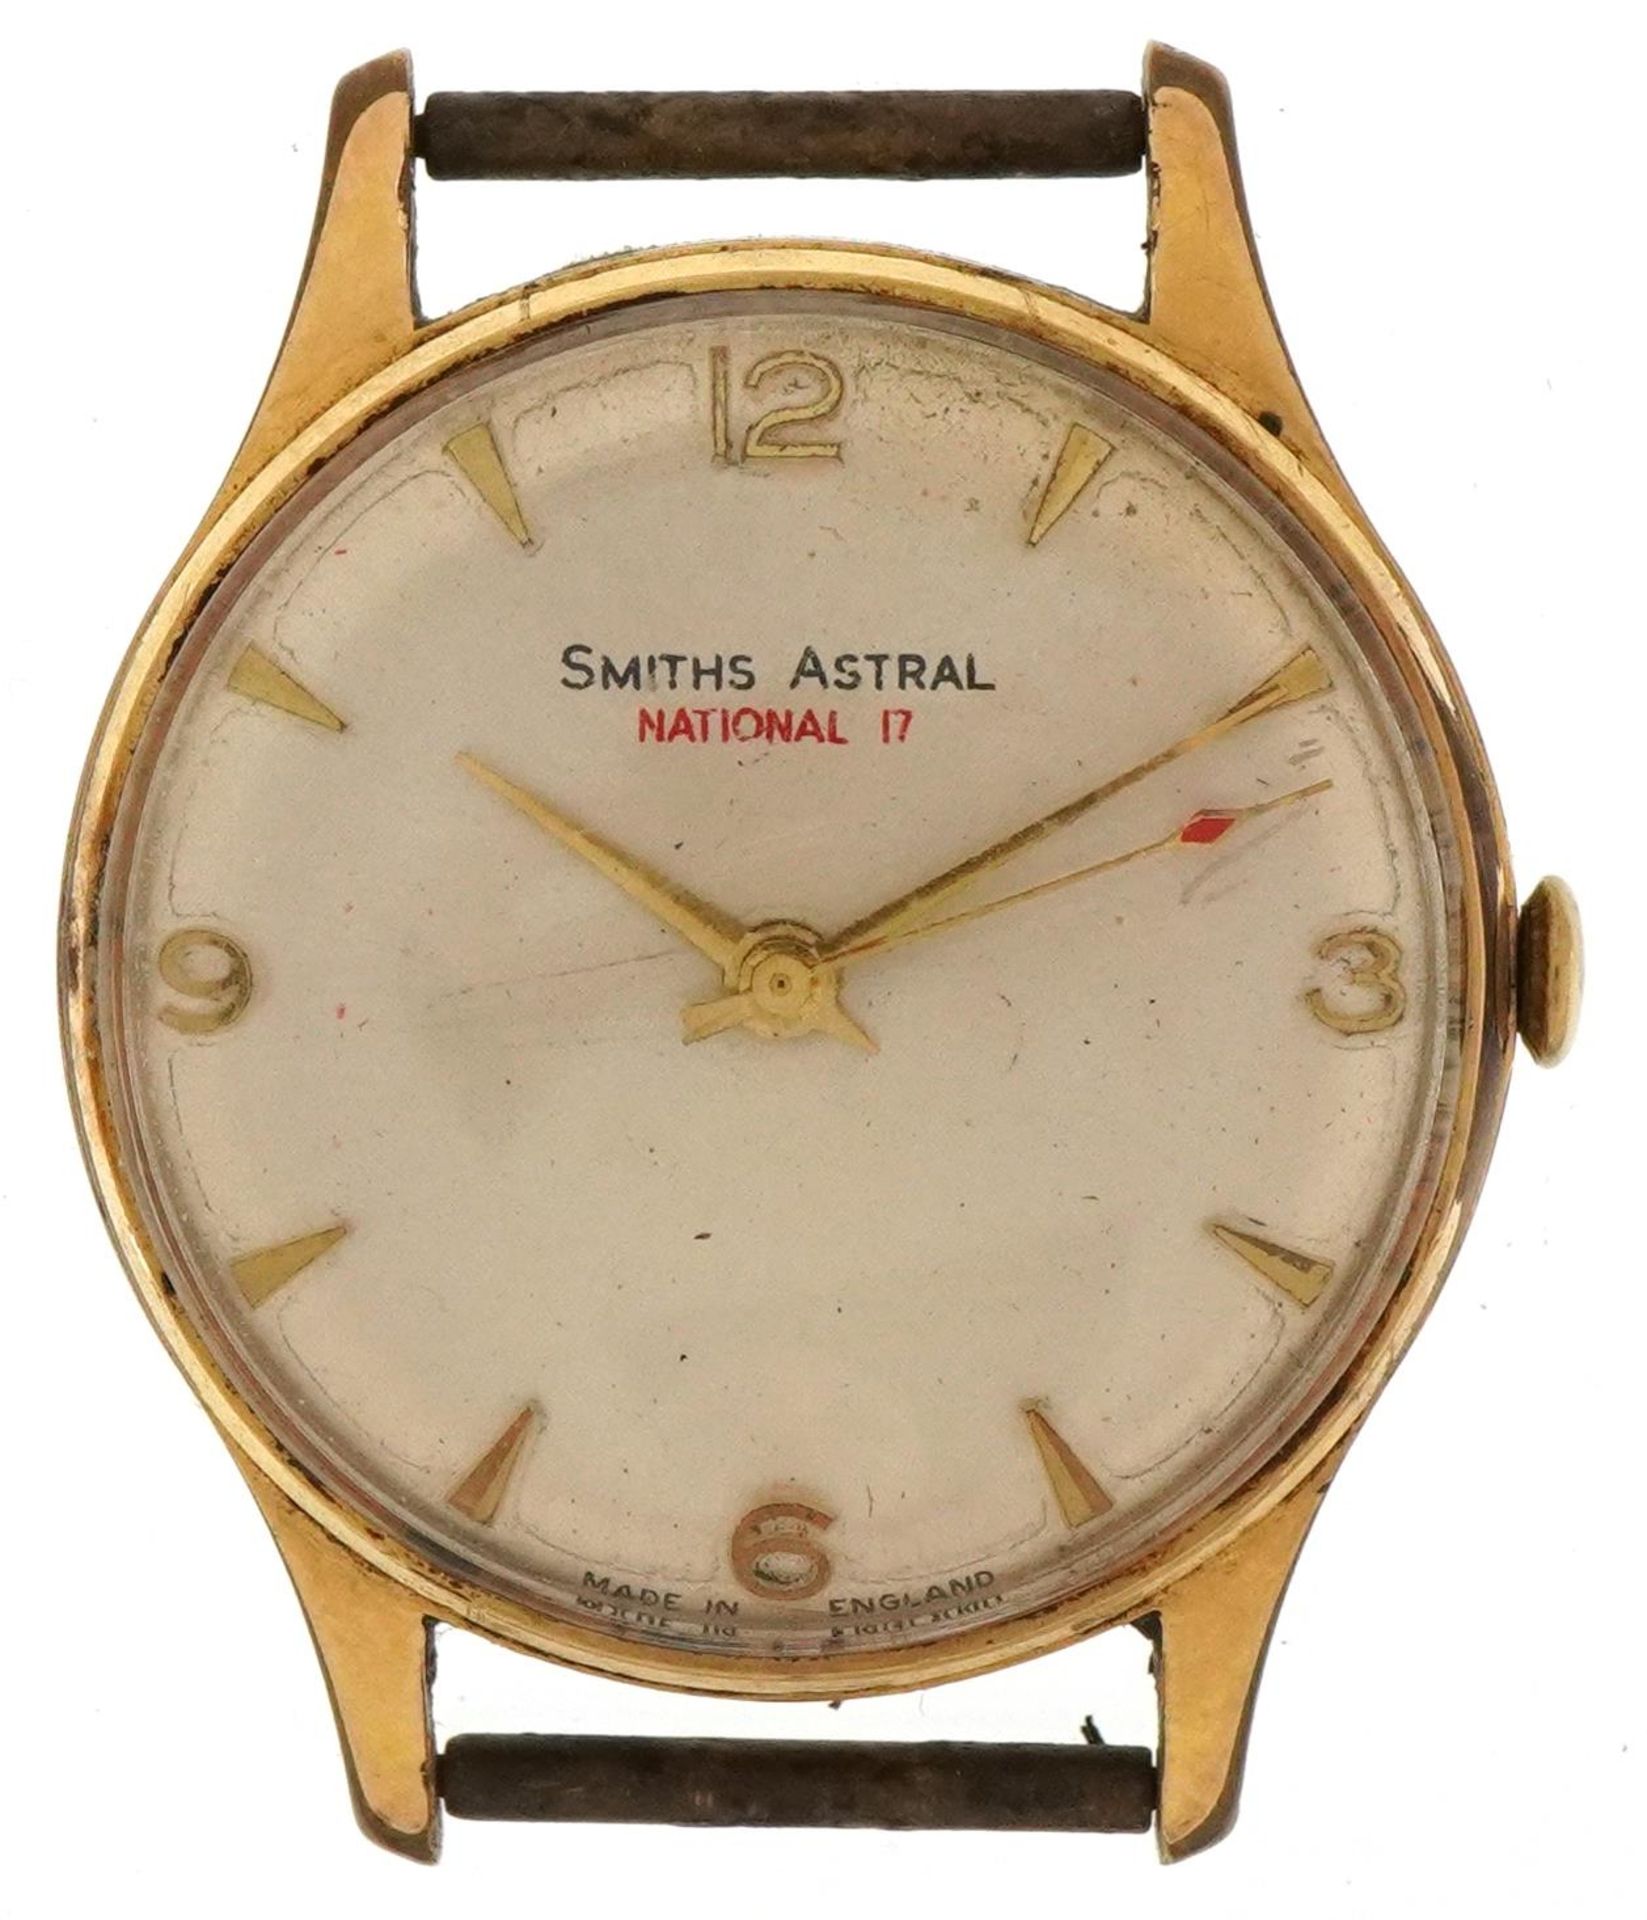 Smiths, gentlemen's Smiths Astral National 17 manual wind wristwatch having silvered dial with